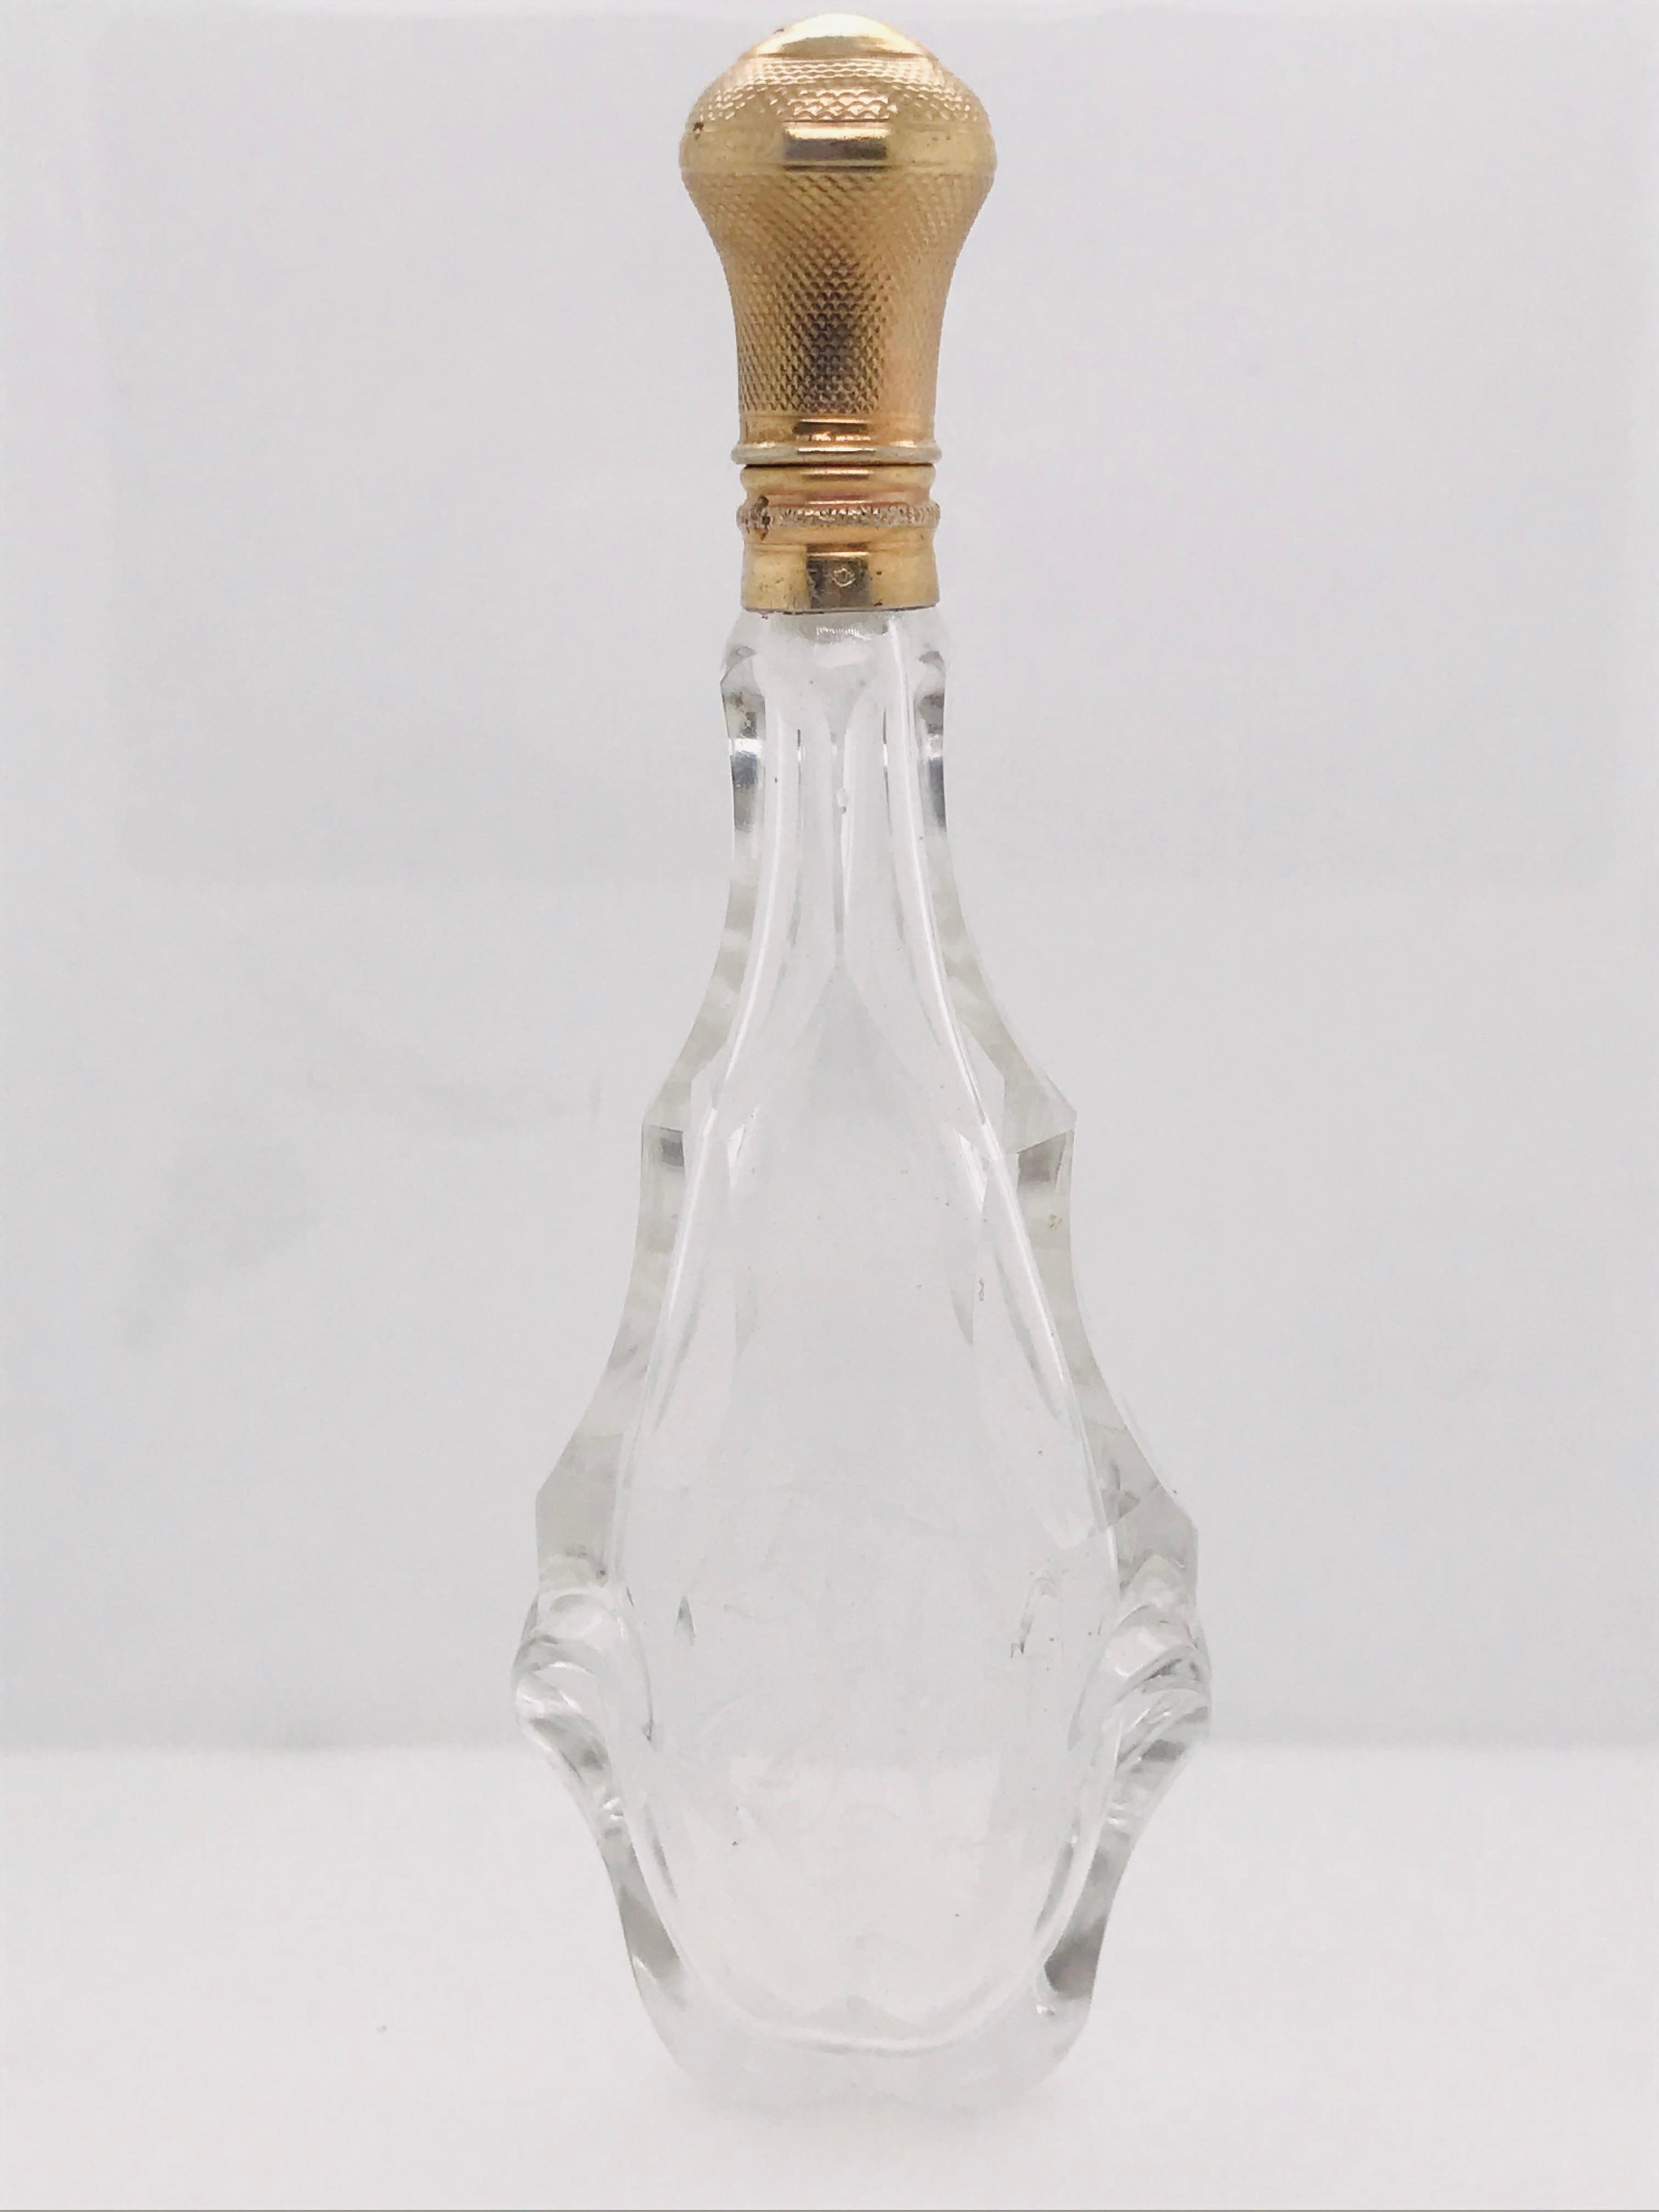 Classical Roman Crystal Perfume Bottle Charle X Period For Sale